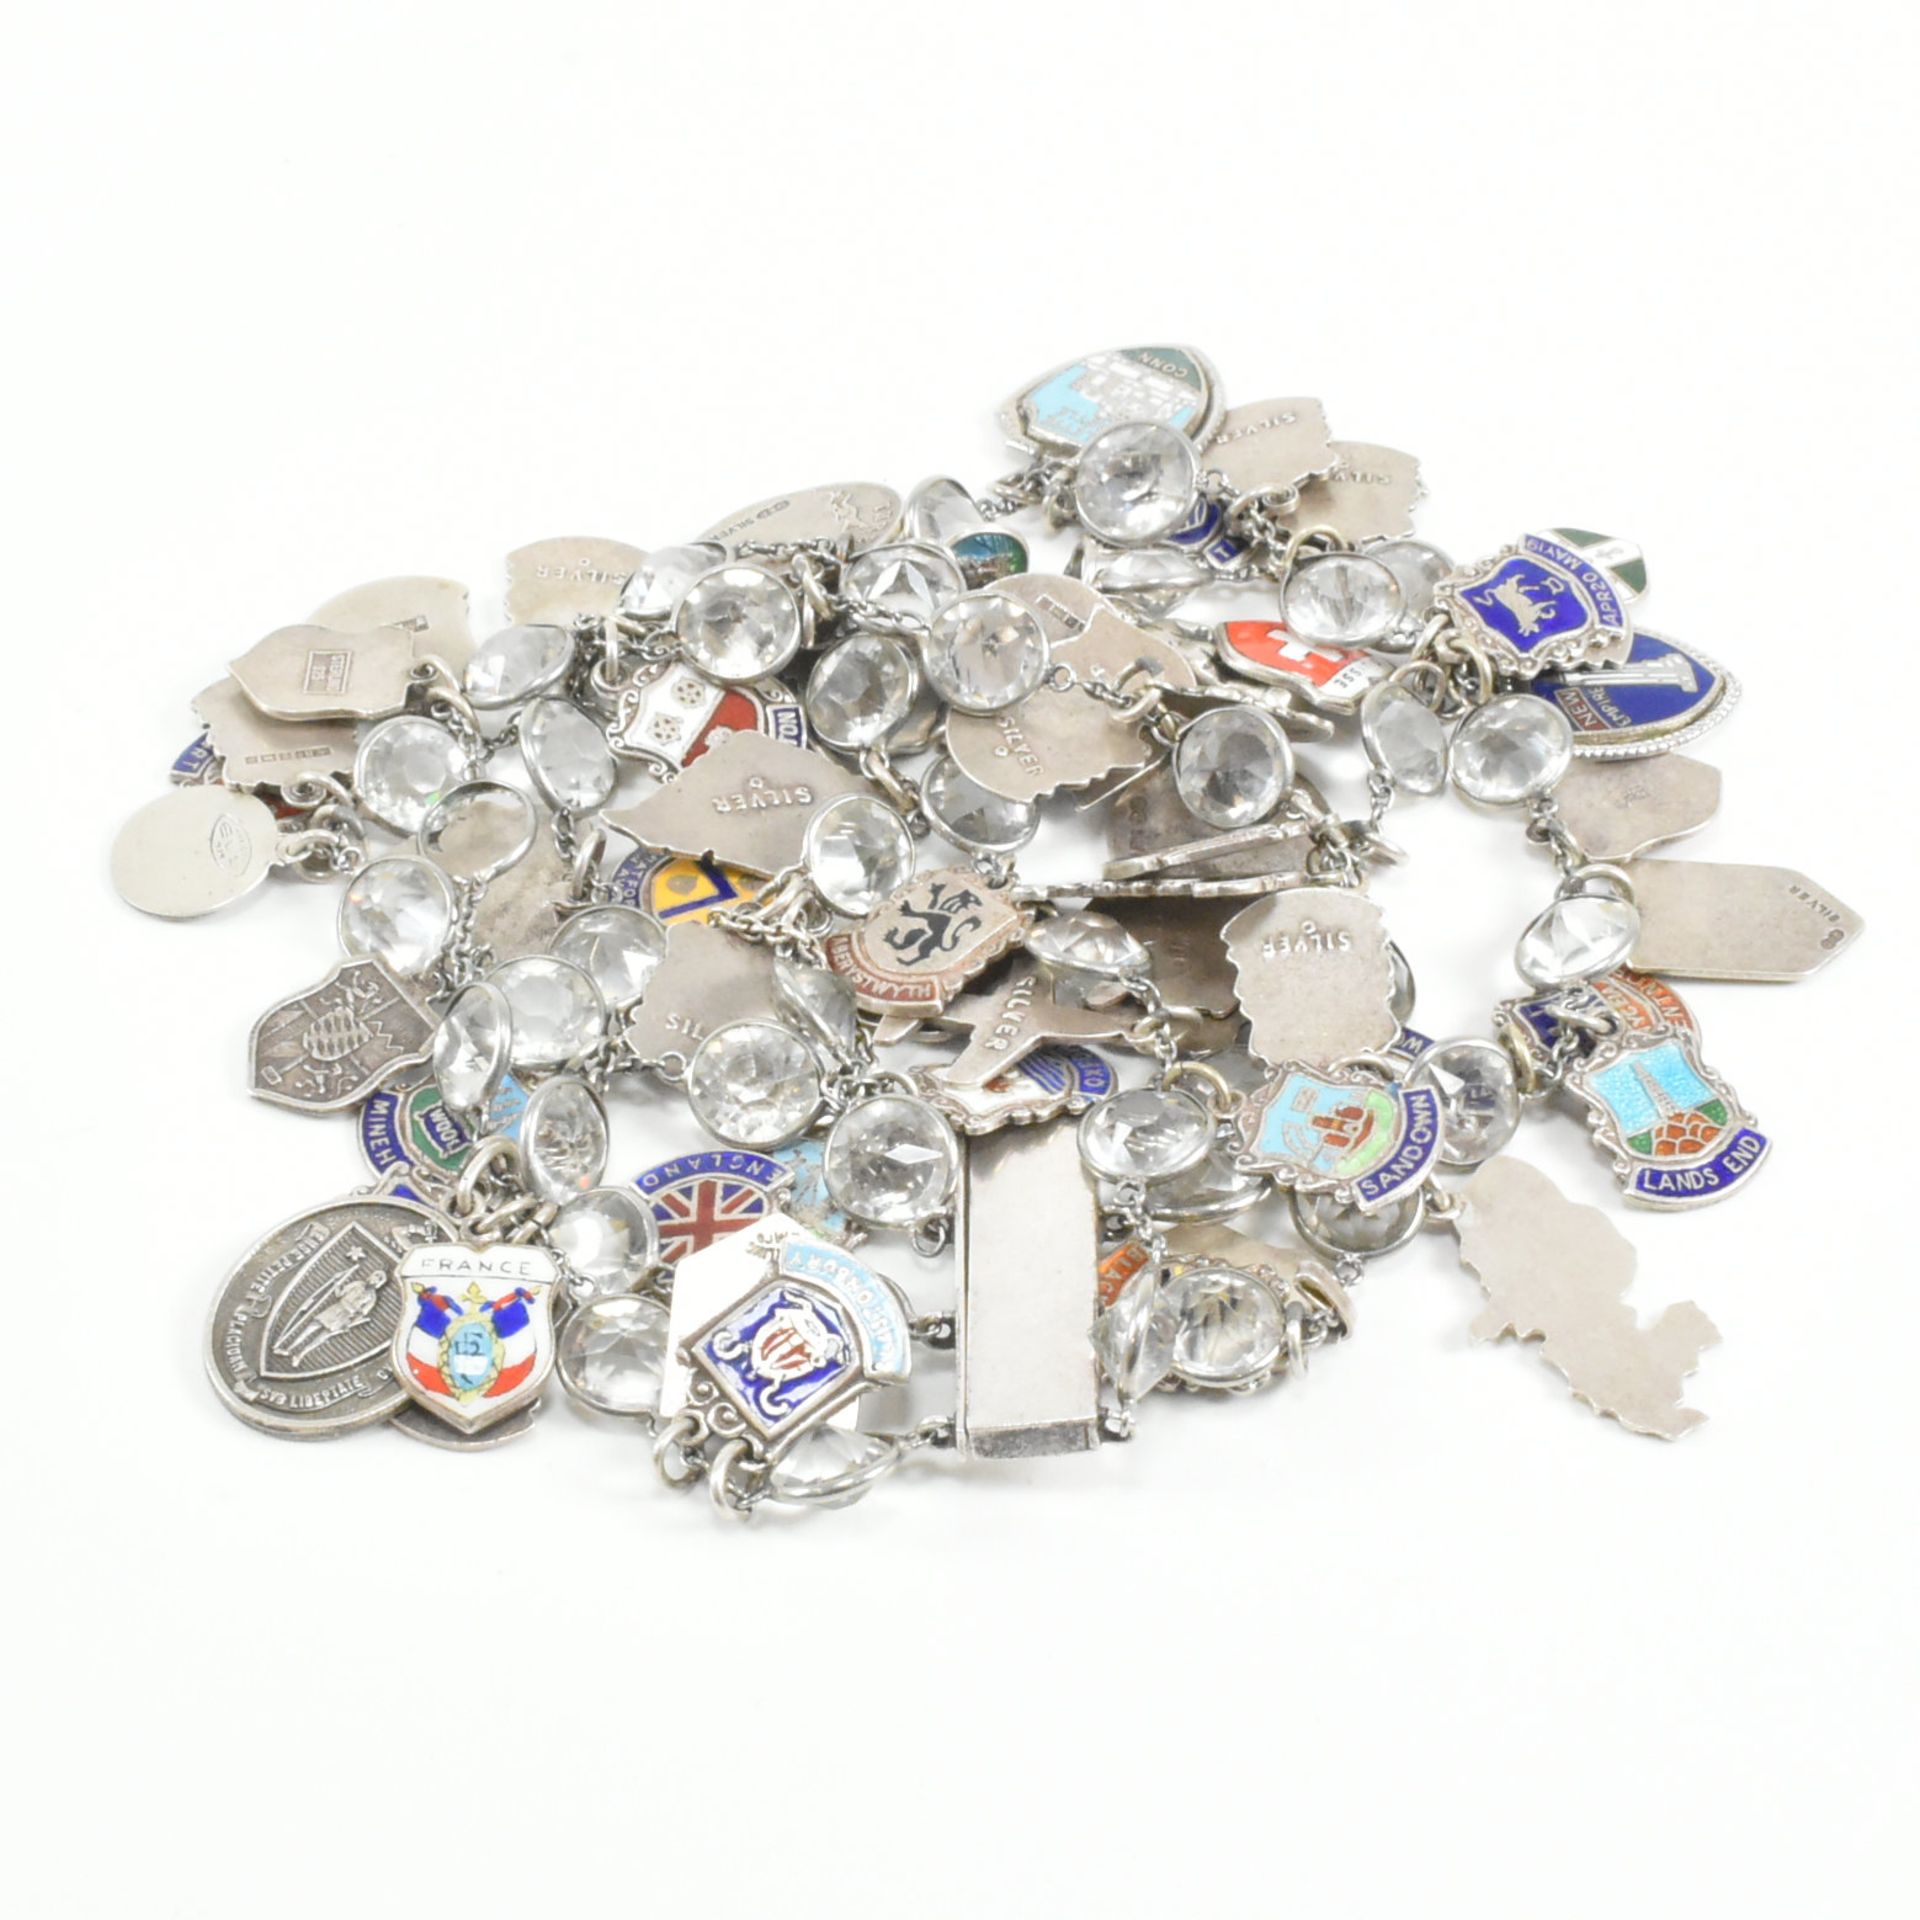 VINTAGE SILVER & WHITE METAL TOWN COUNTRY CHARM BRACELET - Image 12 of 13